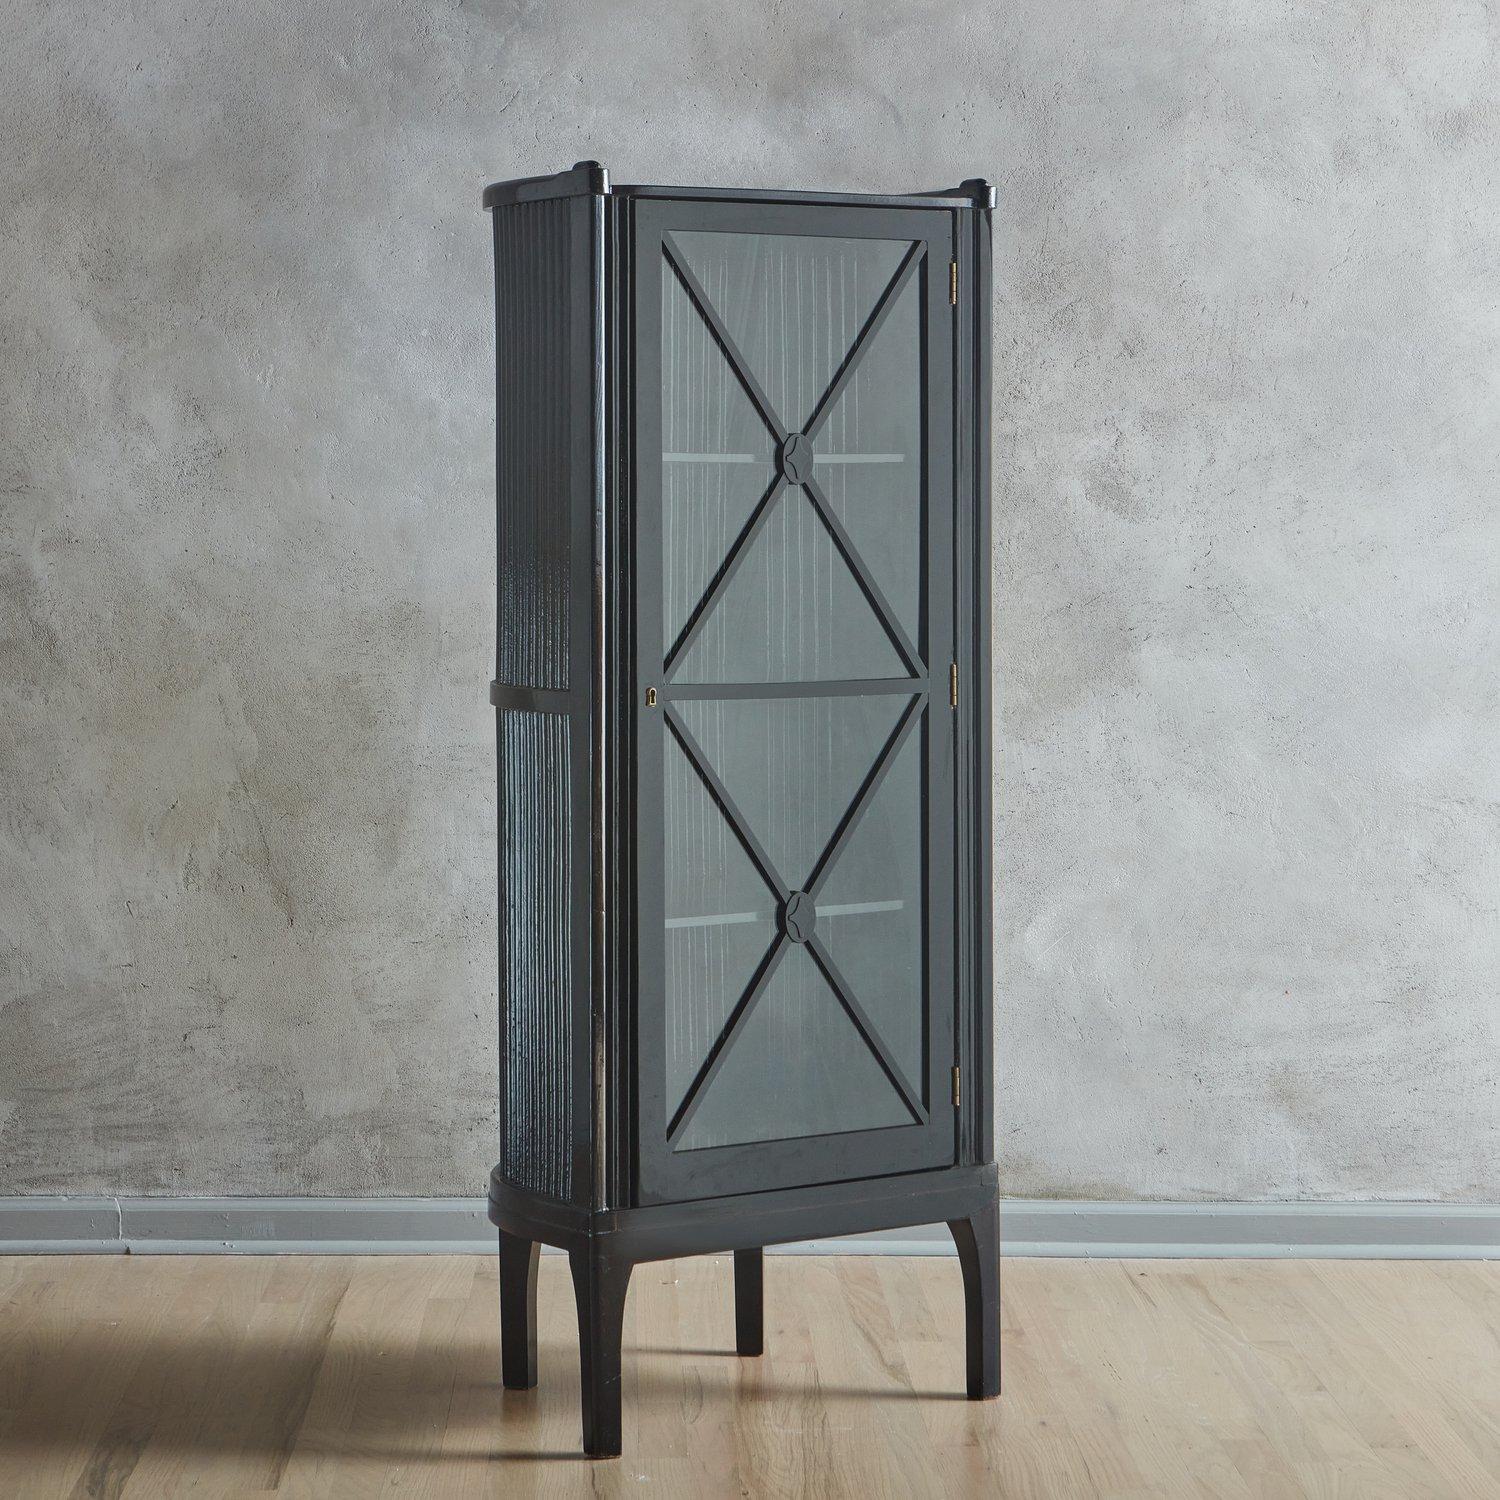 An early 20th Century cabinet designed by Hans Gunther Reinstein featuring a black lacquered wood frame with a fluted barrel back. This elegant piece has a hinged glass door with two shelves and stands on tall block legs. Retains partial ‘Ellmauer